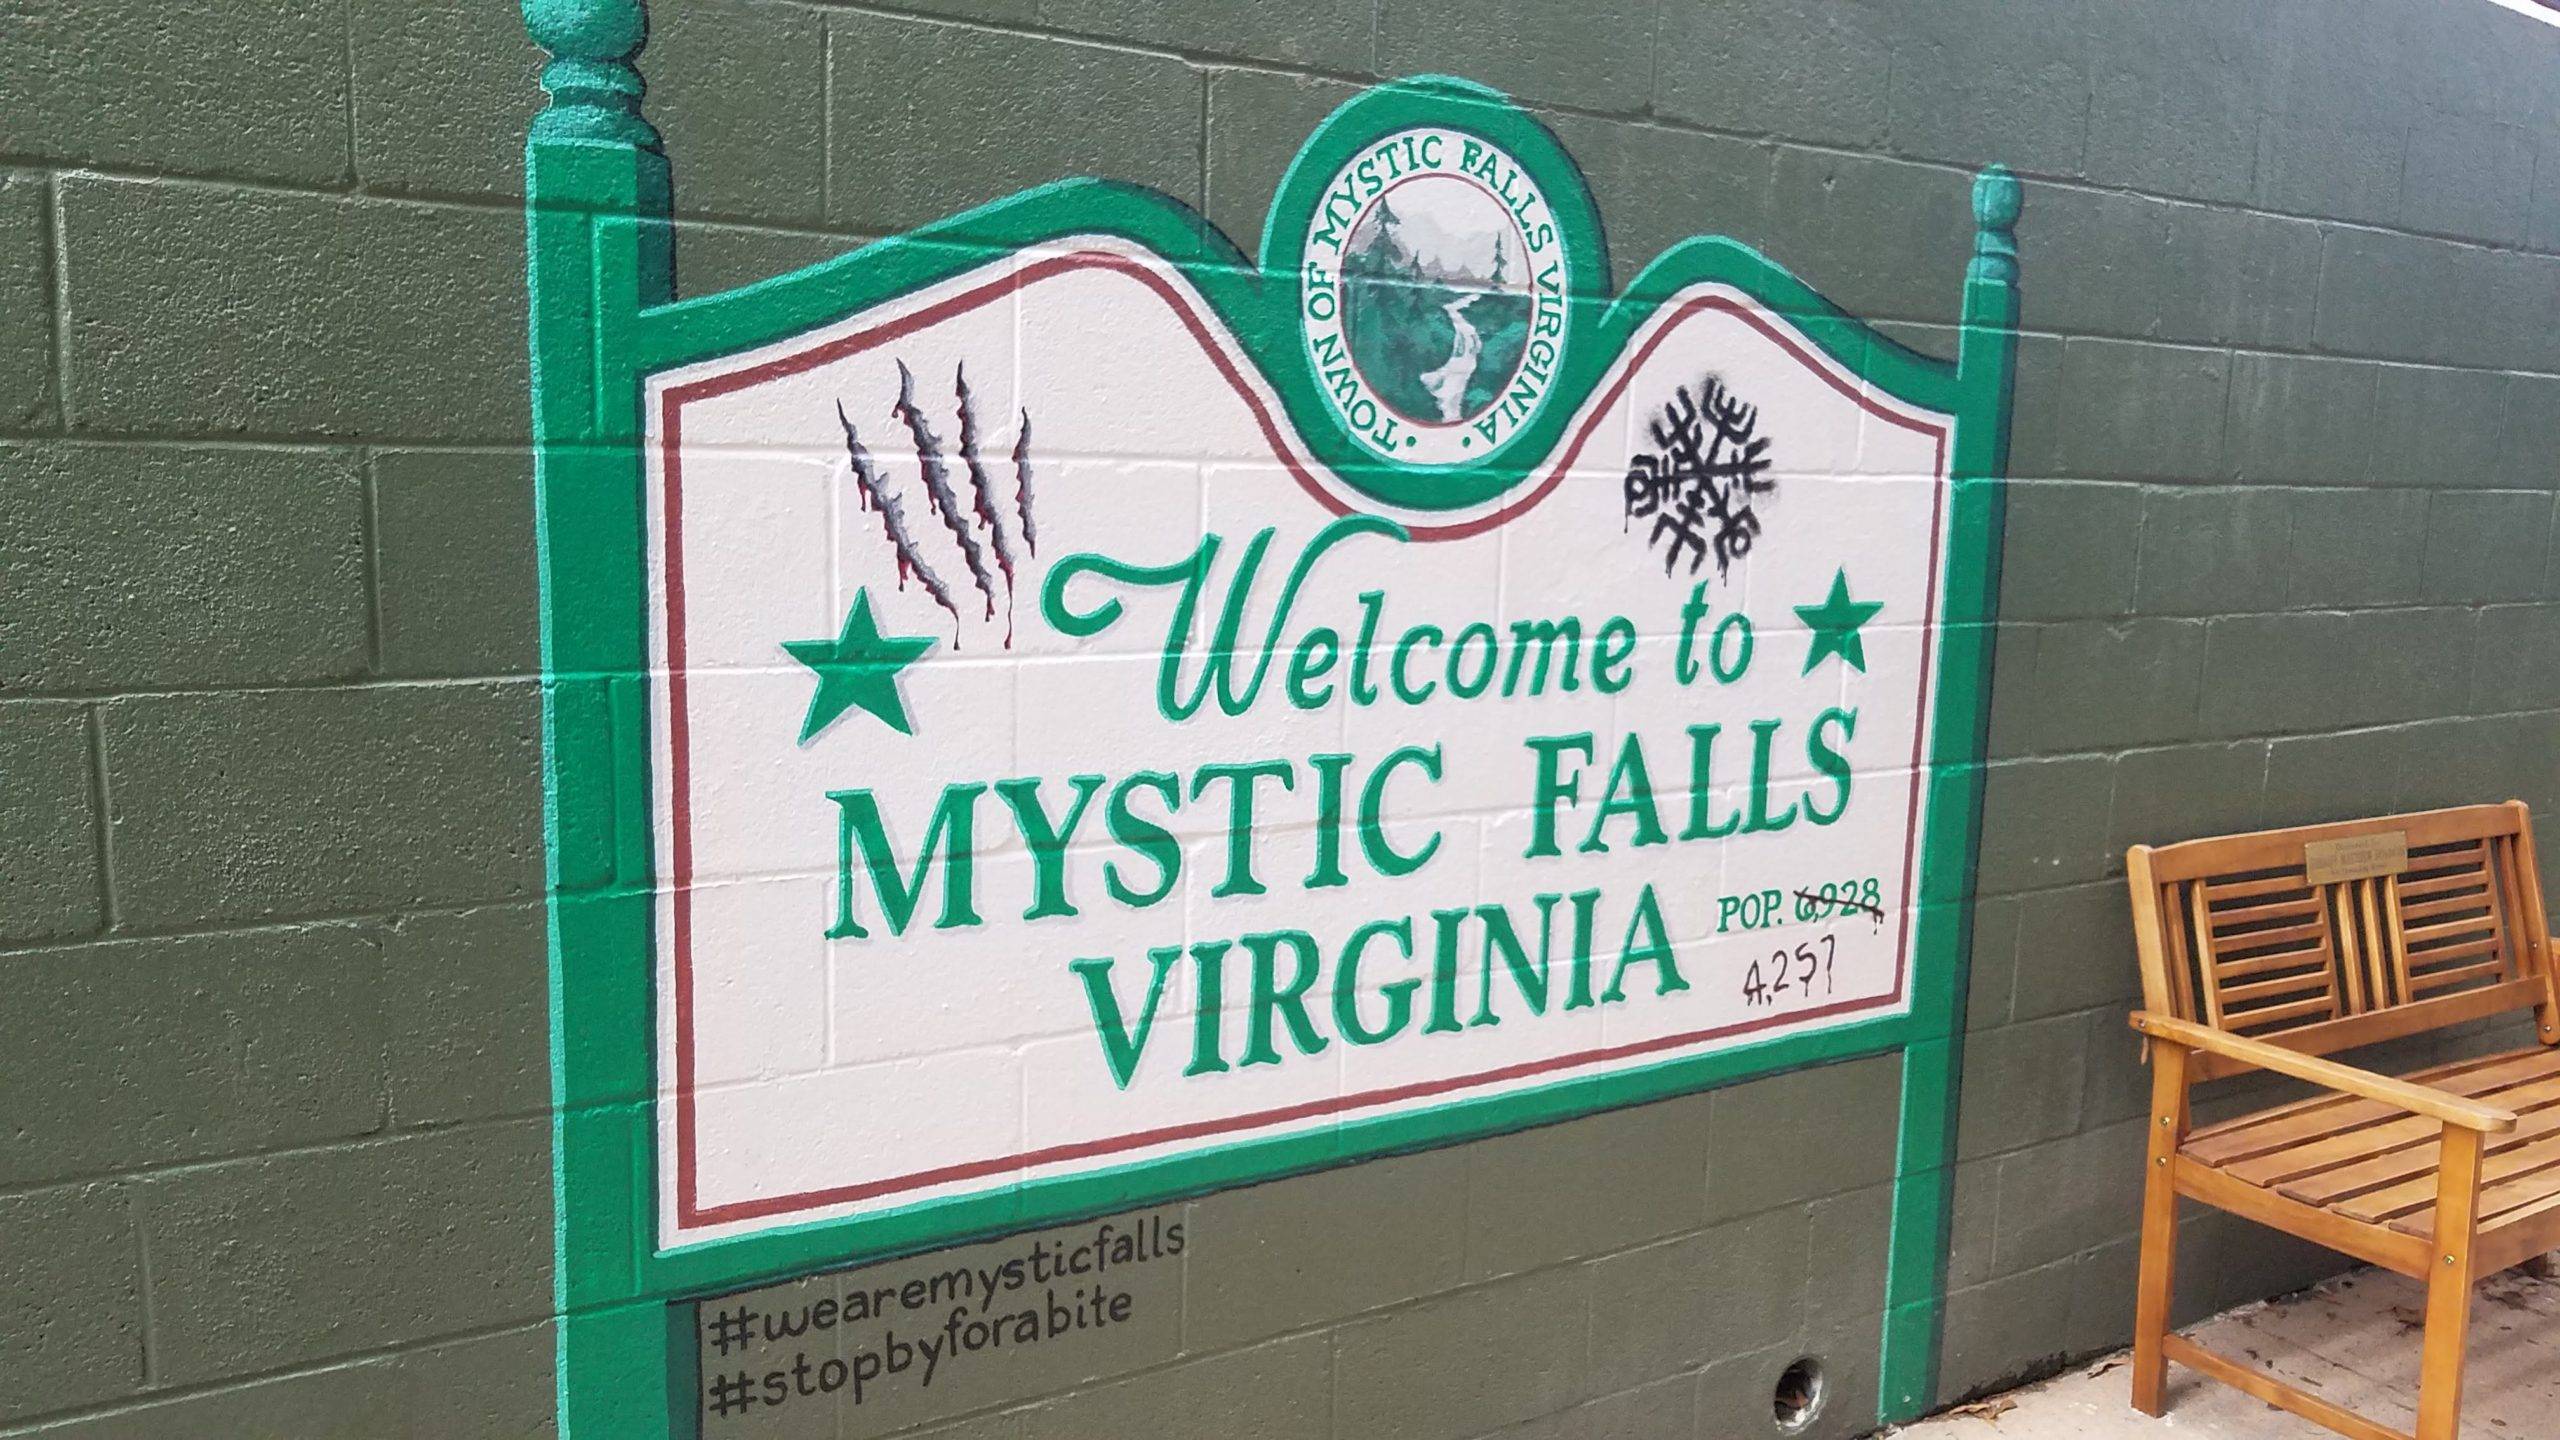 The Real Mystic Falls From Vampire Diaries